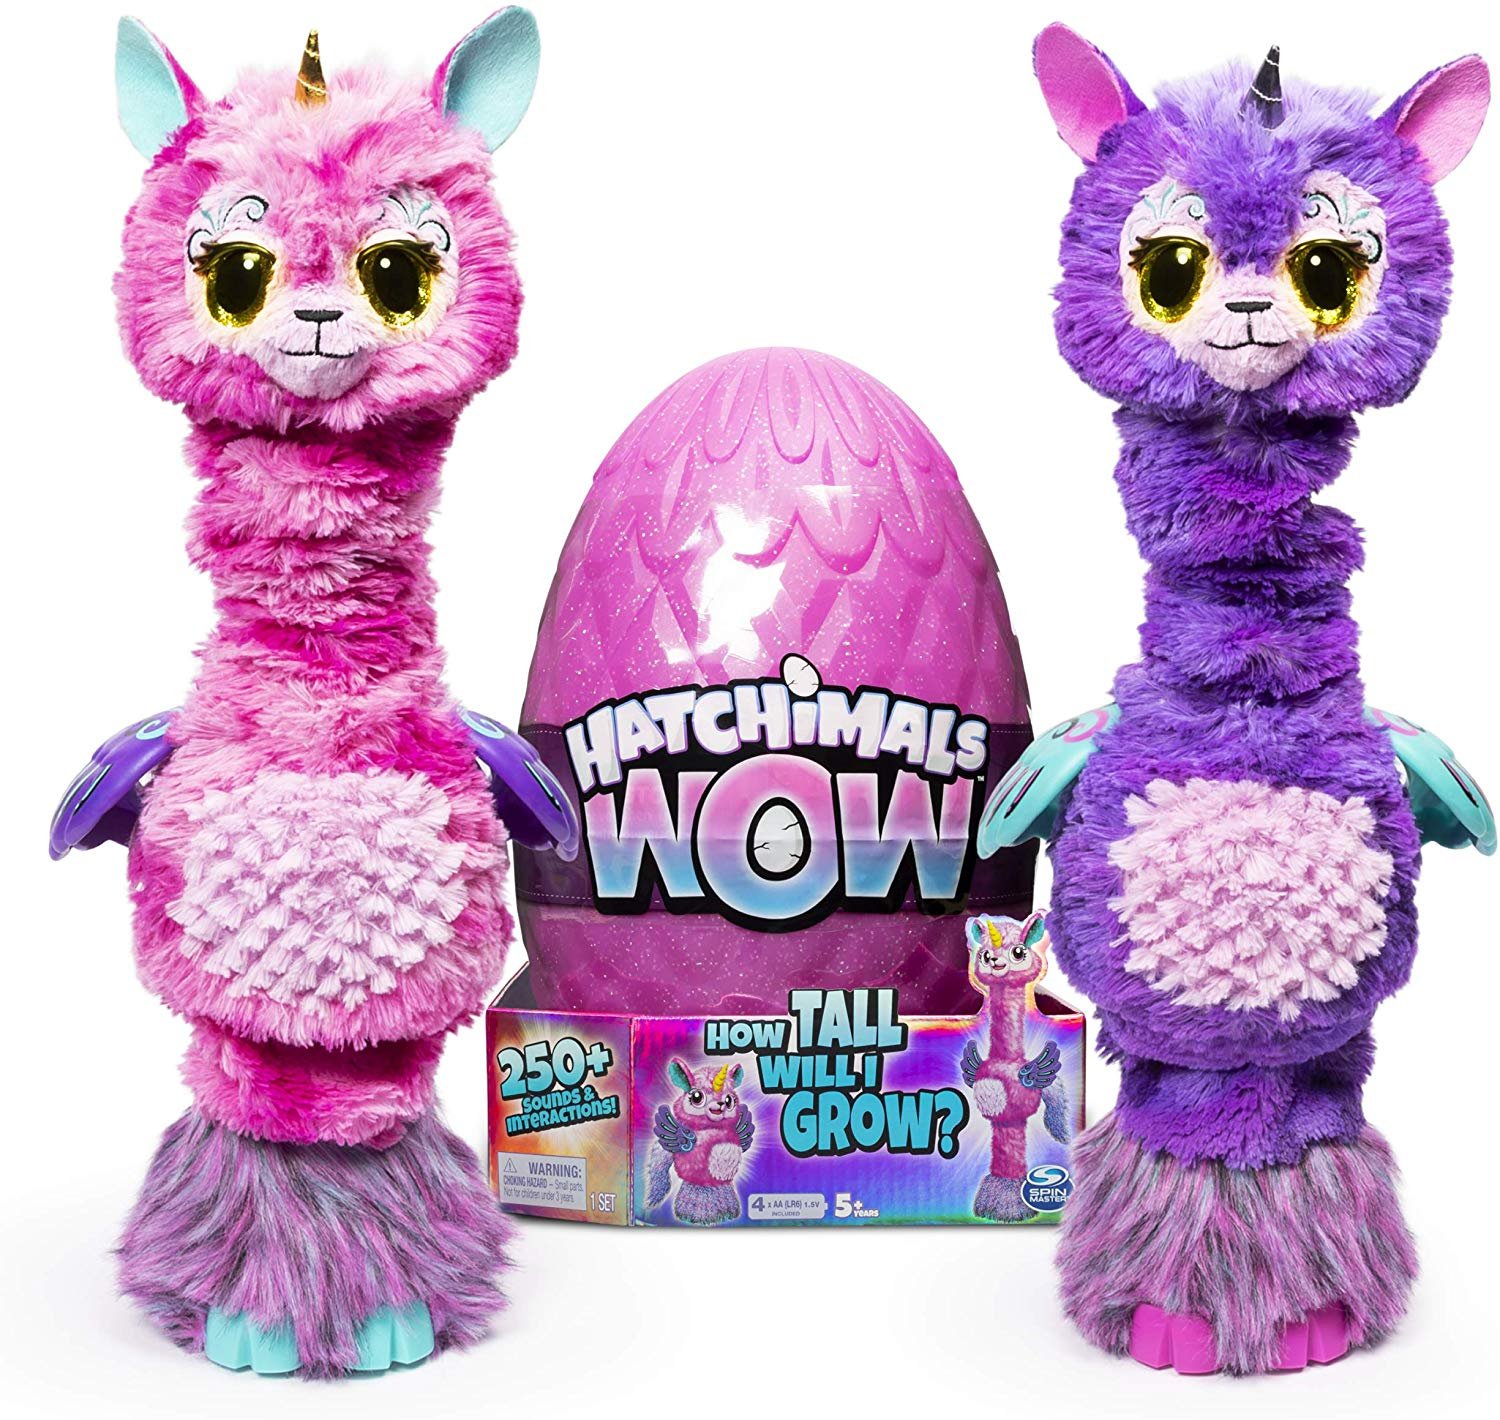 Hatchimals WOW, Llalacorn 32-Inch Tall Interactive Electronic Pet (Styles May Vary) - image 1 of 12